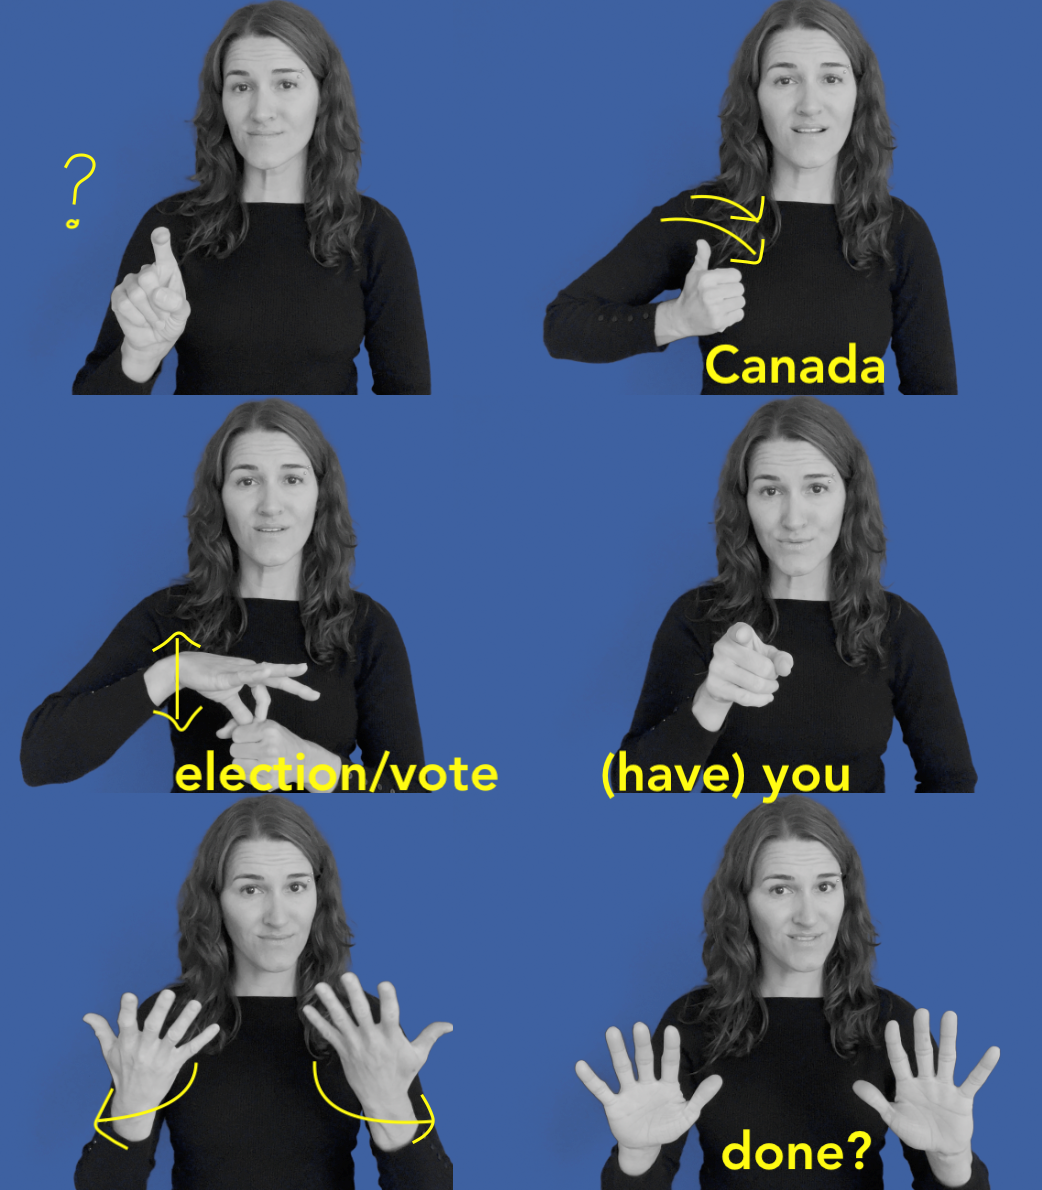 Have you voted for Canada?  Close up of a sign language interpreter with long hair demonstrates how to sign the words "Have you voted for Canada" in five steps.